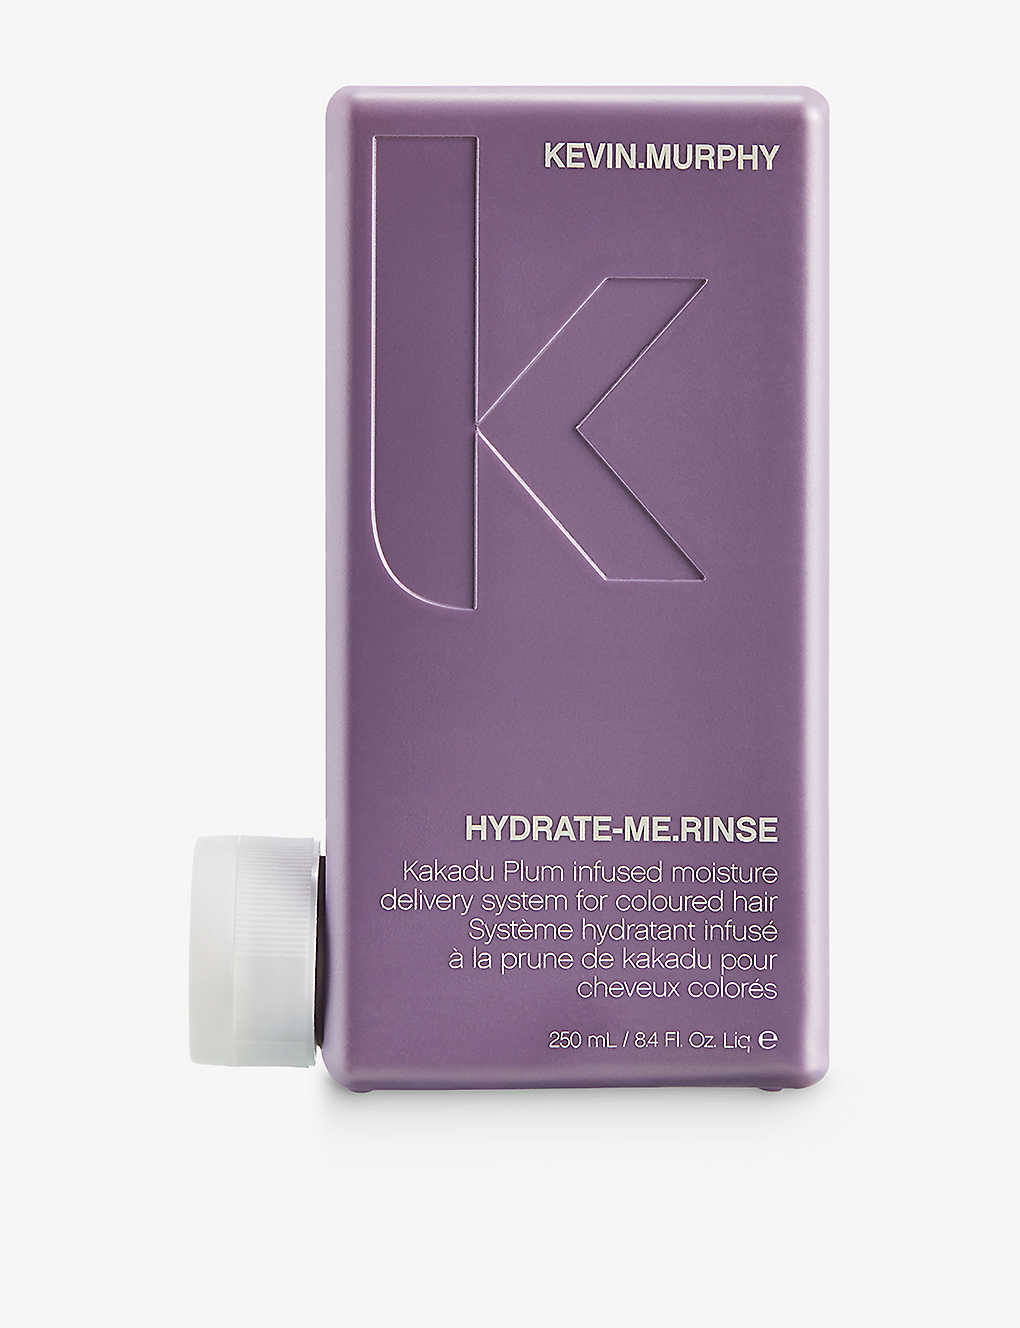 Kevin Murphy Hydrate-me.rinse Conditioner